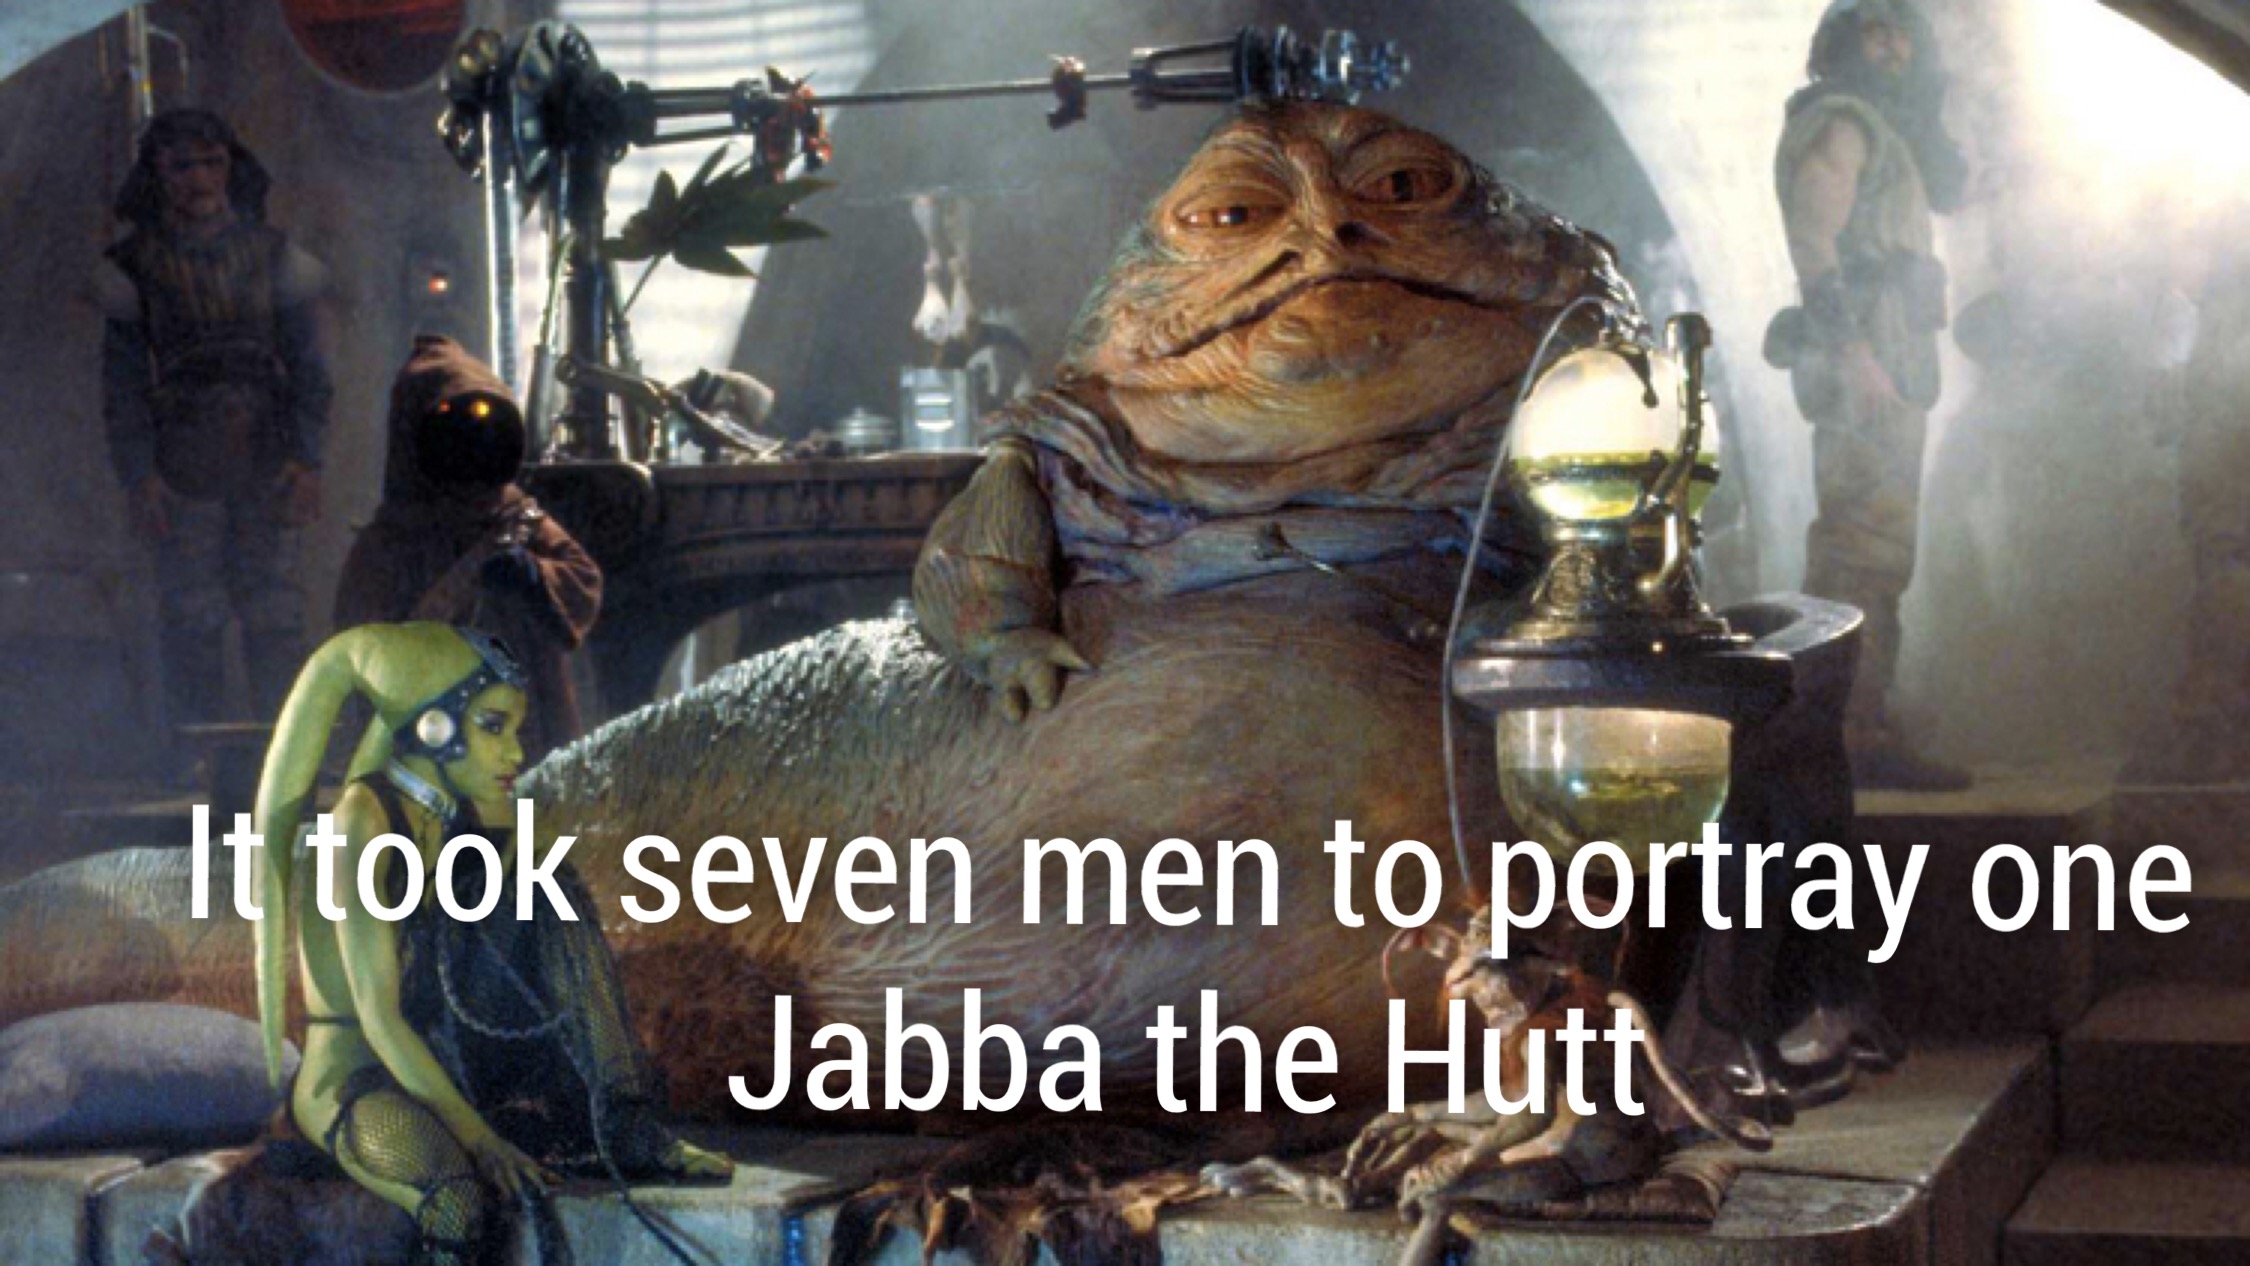 25 Facts About Star Wars That Will Bring Balance to the Force